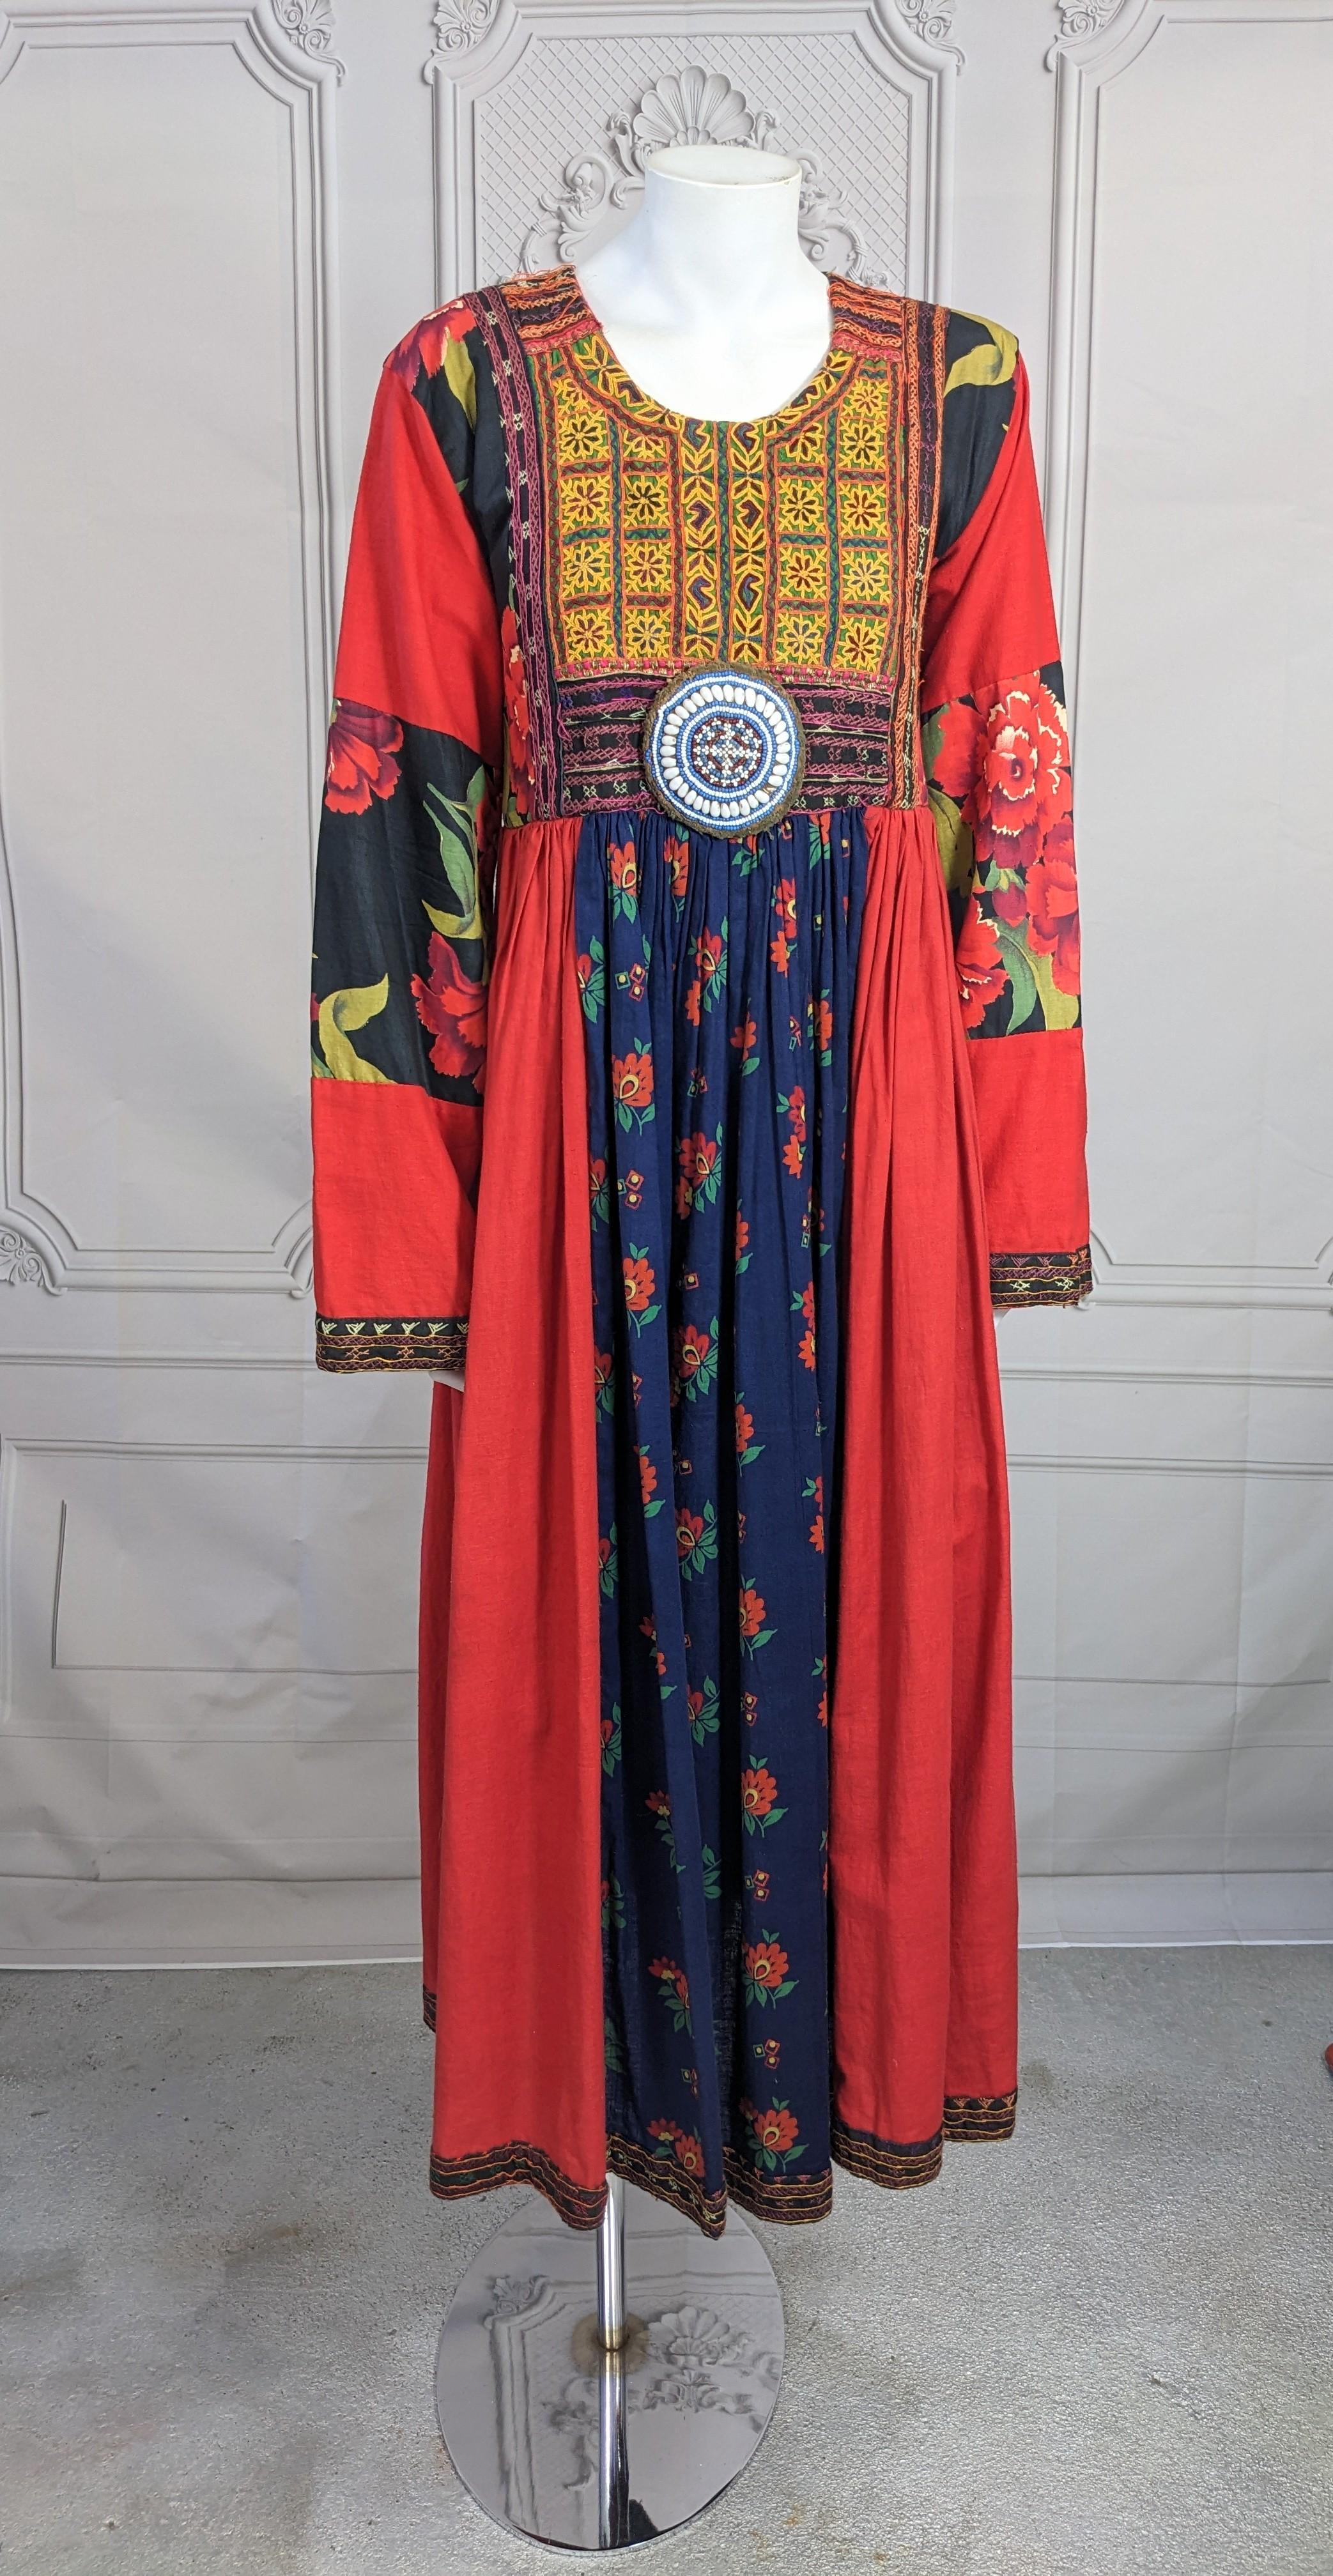 Fiorucci Bohemian Patchwork Maxi from the 1970's. Fiorucci offered massive variety in its lines before it became known worldwide in the Disco era. 
This Boho hippie style is a patchwork of fabrics and embroideries from different places. Red cotton